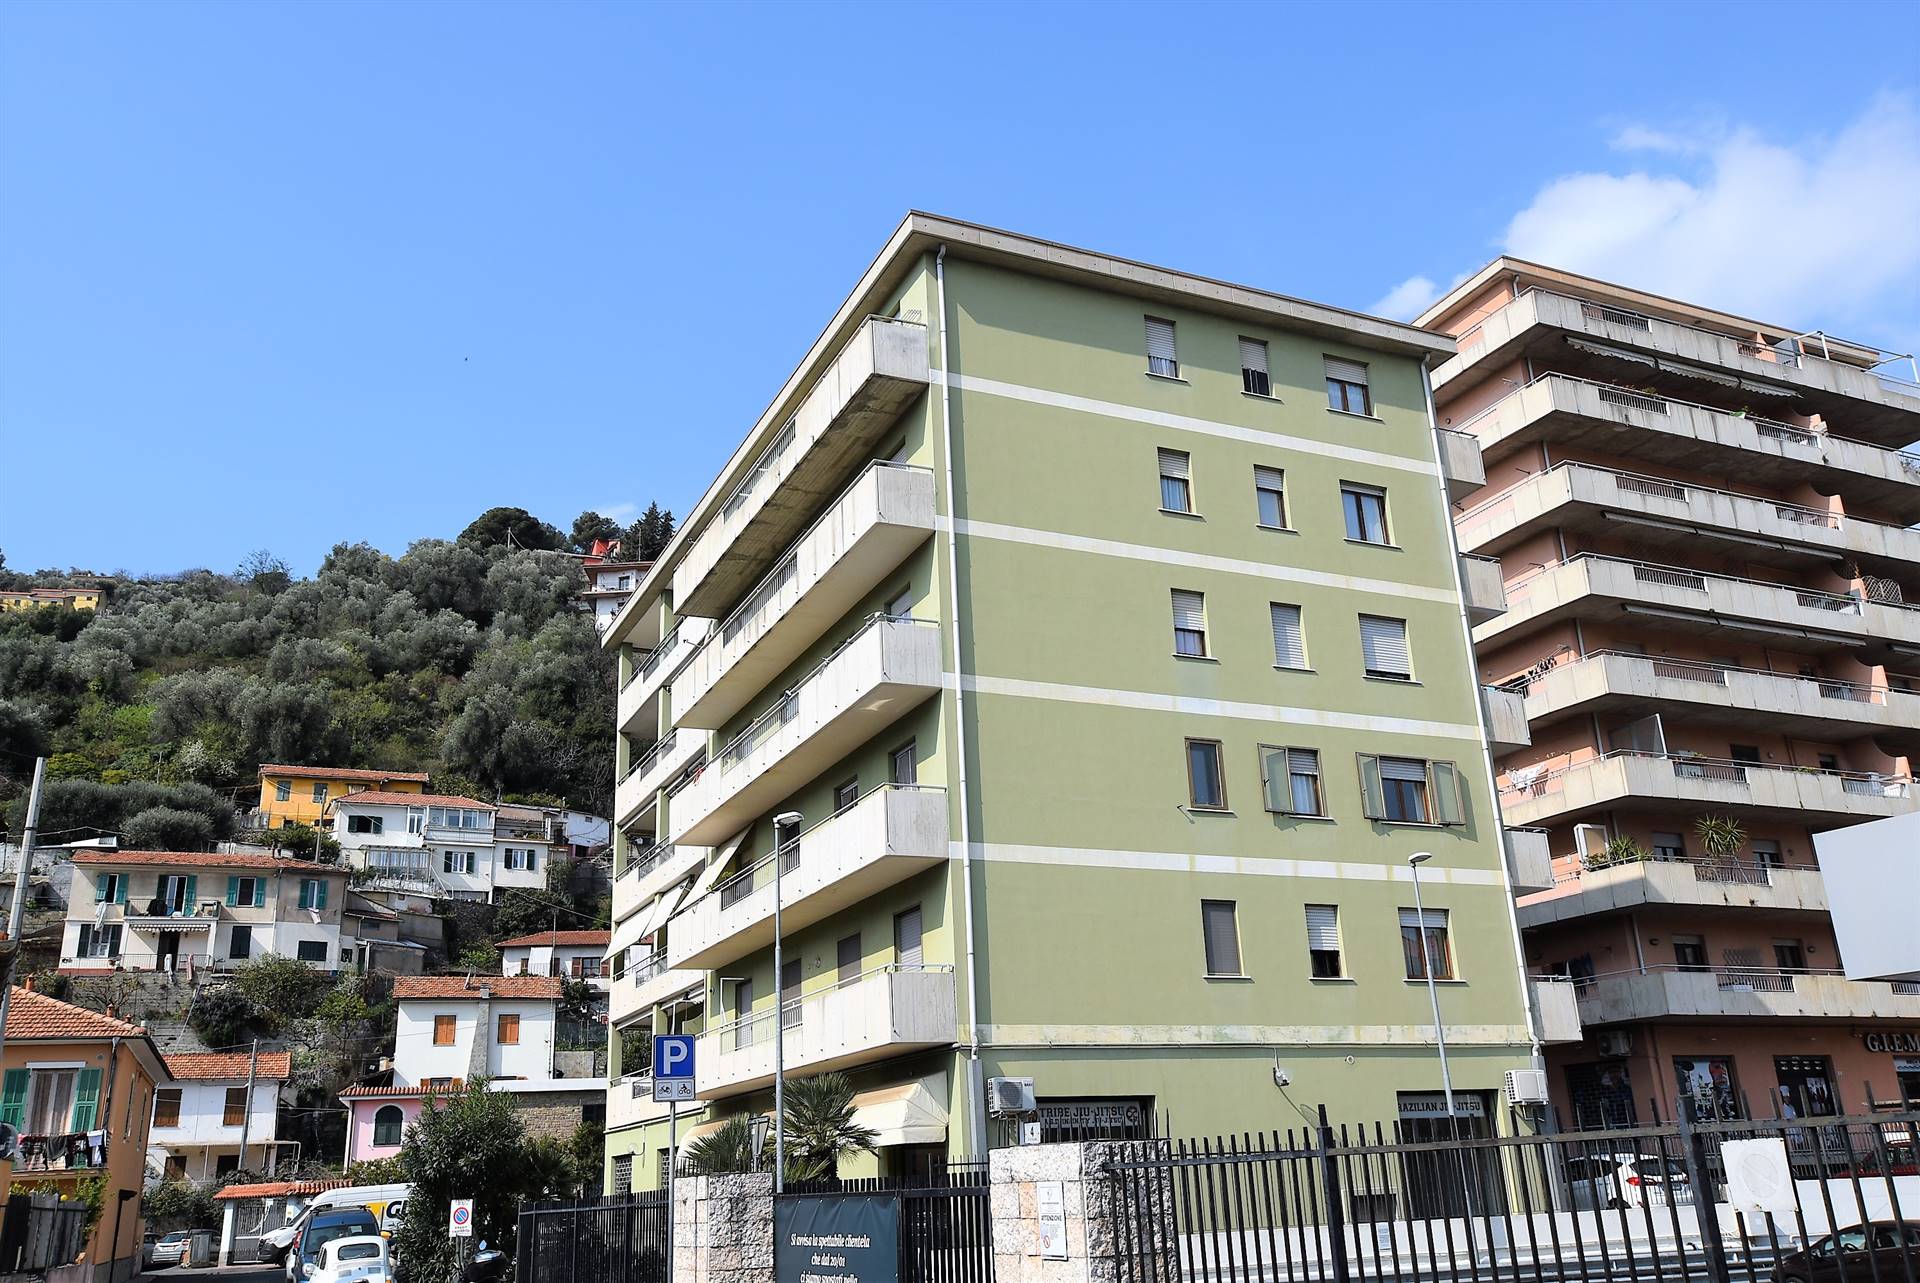 ONEGLIA CENTRO, IMPERIA, Apartment for sale of 62 Sq. mt., Good condition, Heating Individual heating system, Energetic class: D, Epi: 77,39 kwh/m2 